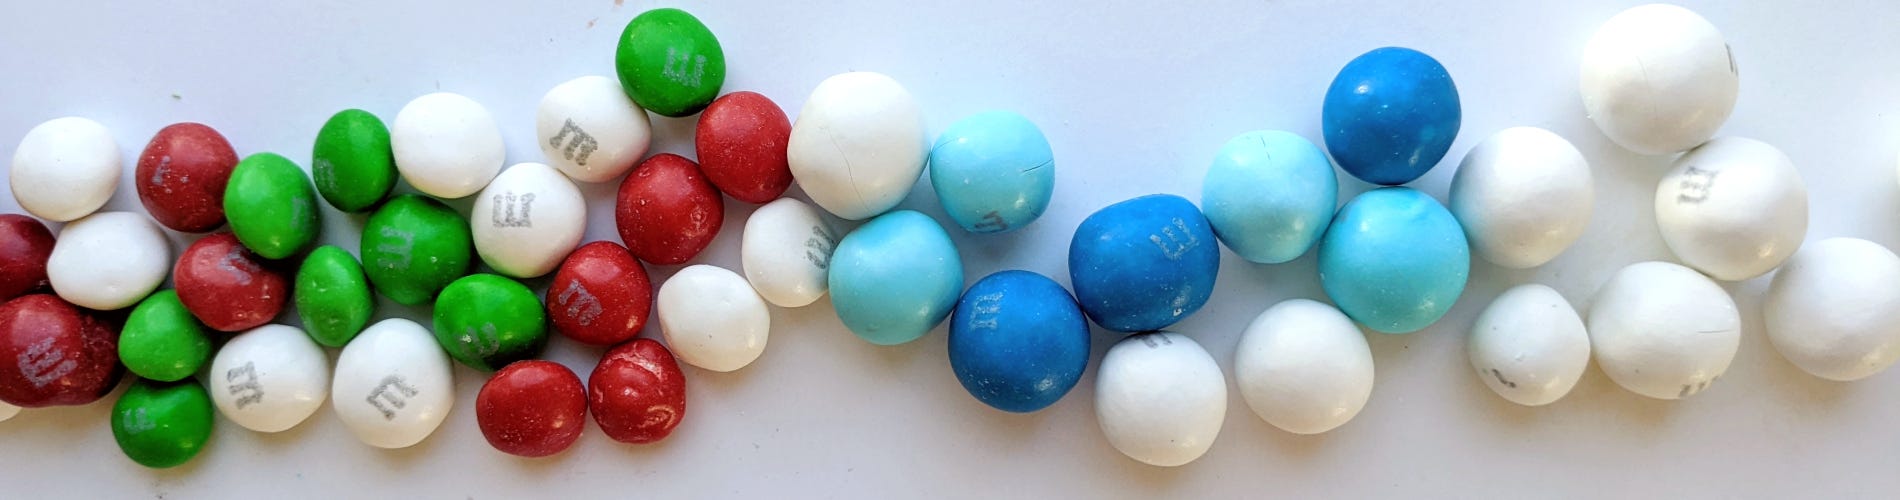 M&M's White Chocolate Pretzel Snowballs will be the holiday candy hit